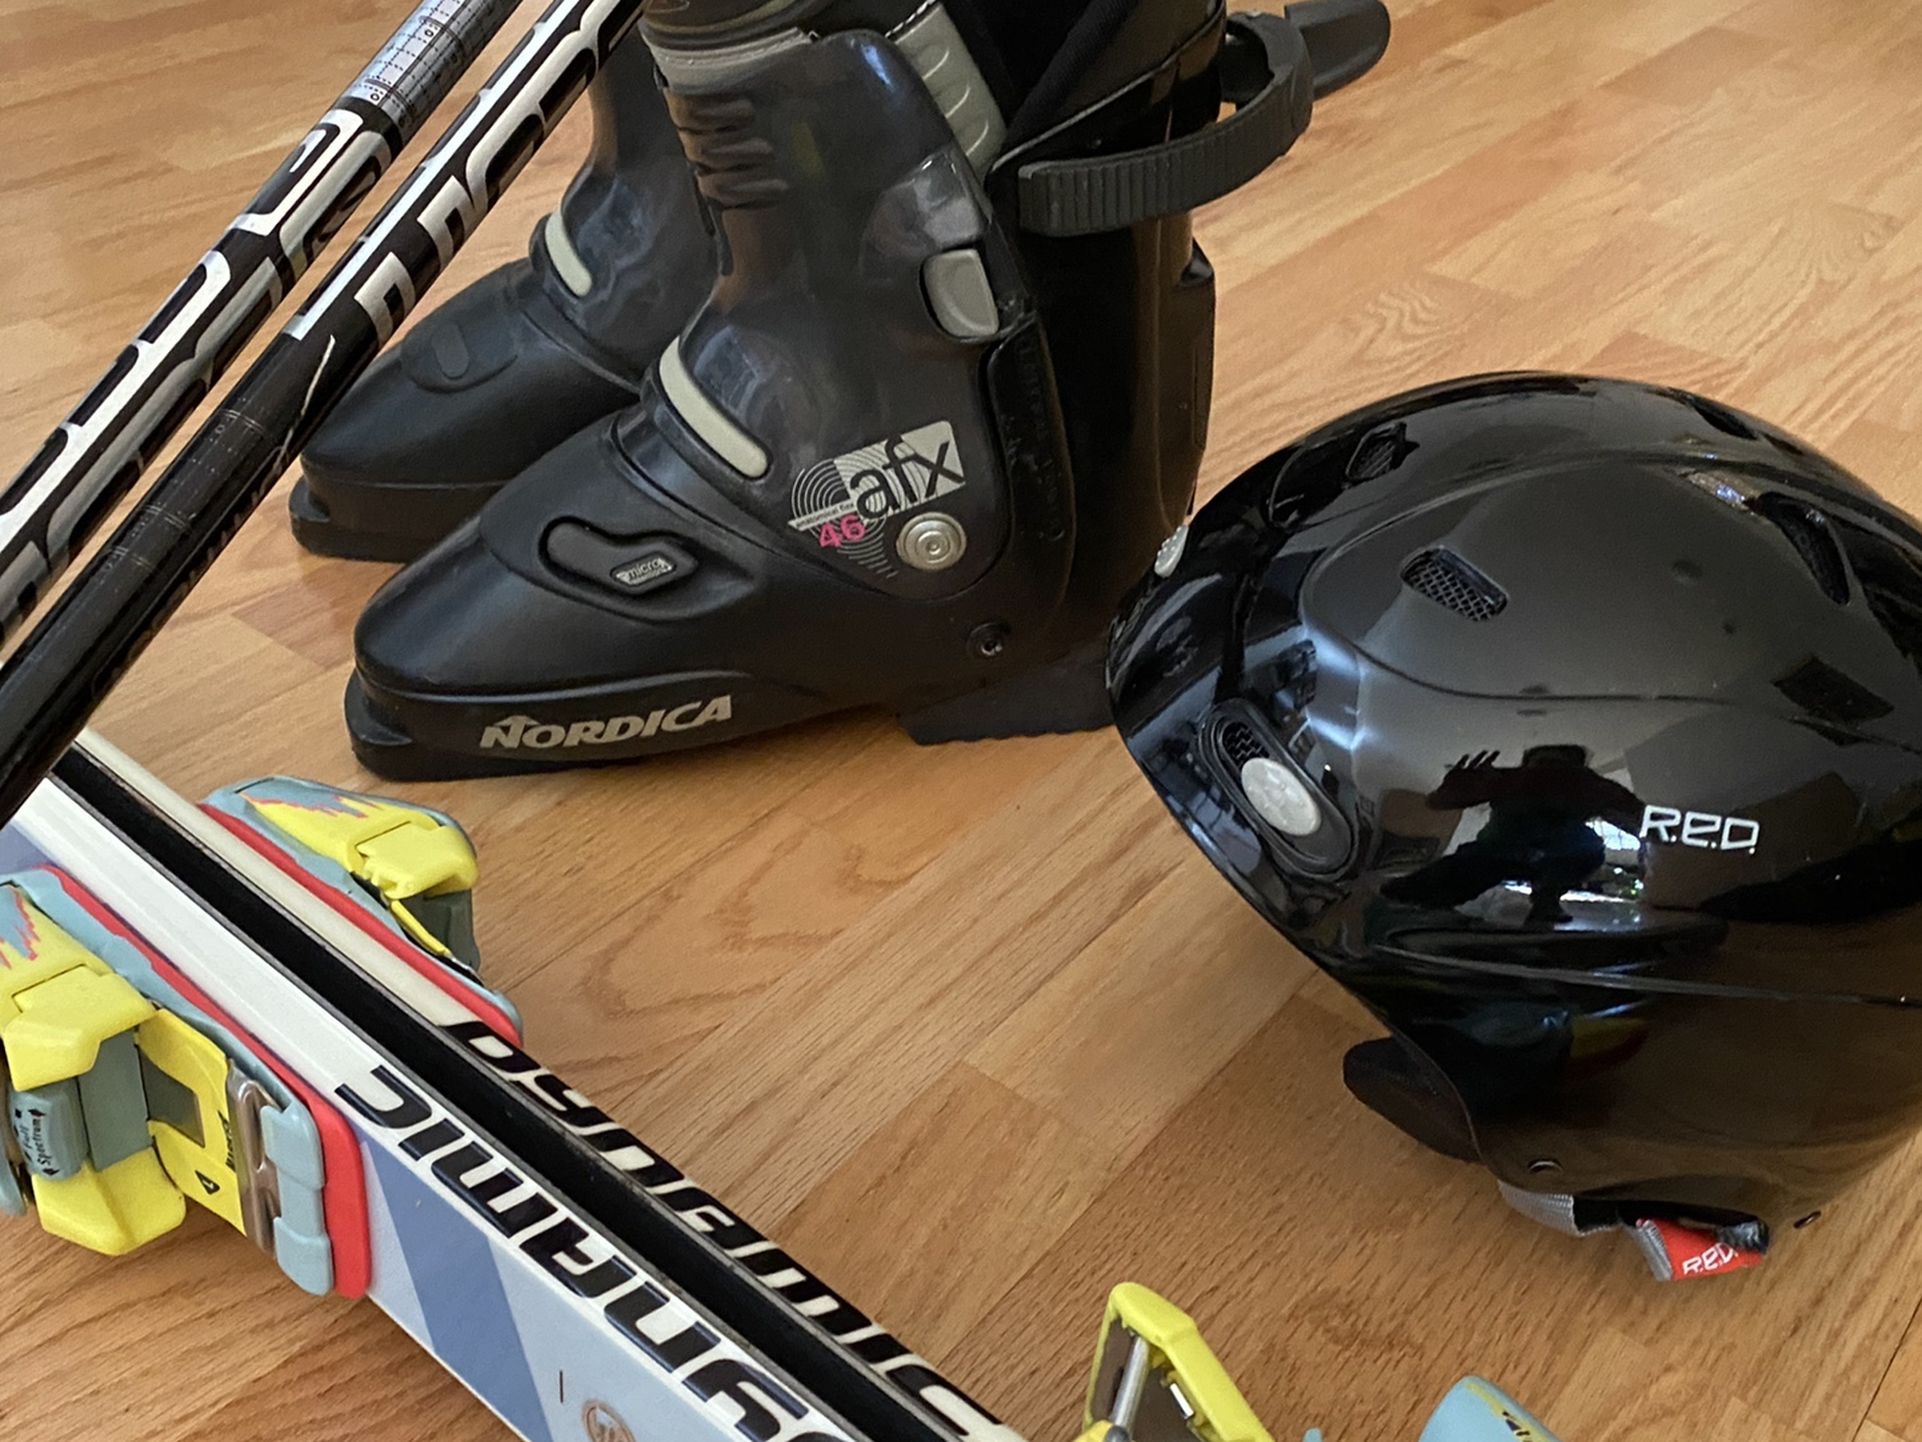 Women’s Ski Package That Includes: Large Helmet, Nordica 8.5 Boots, Dynamic VR7 Ski And Scott Poles